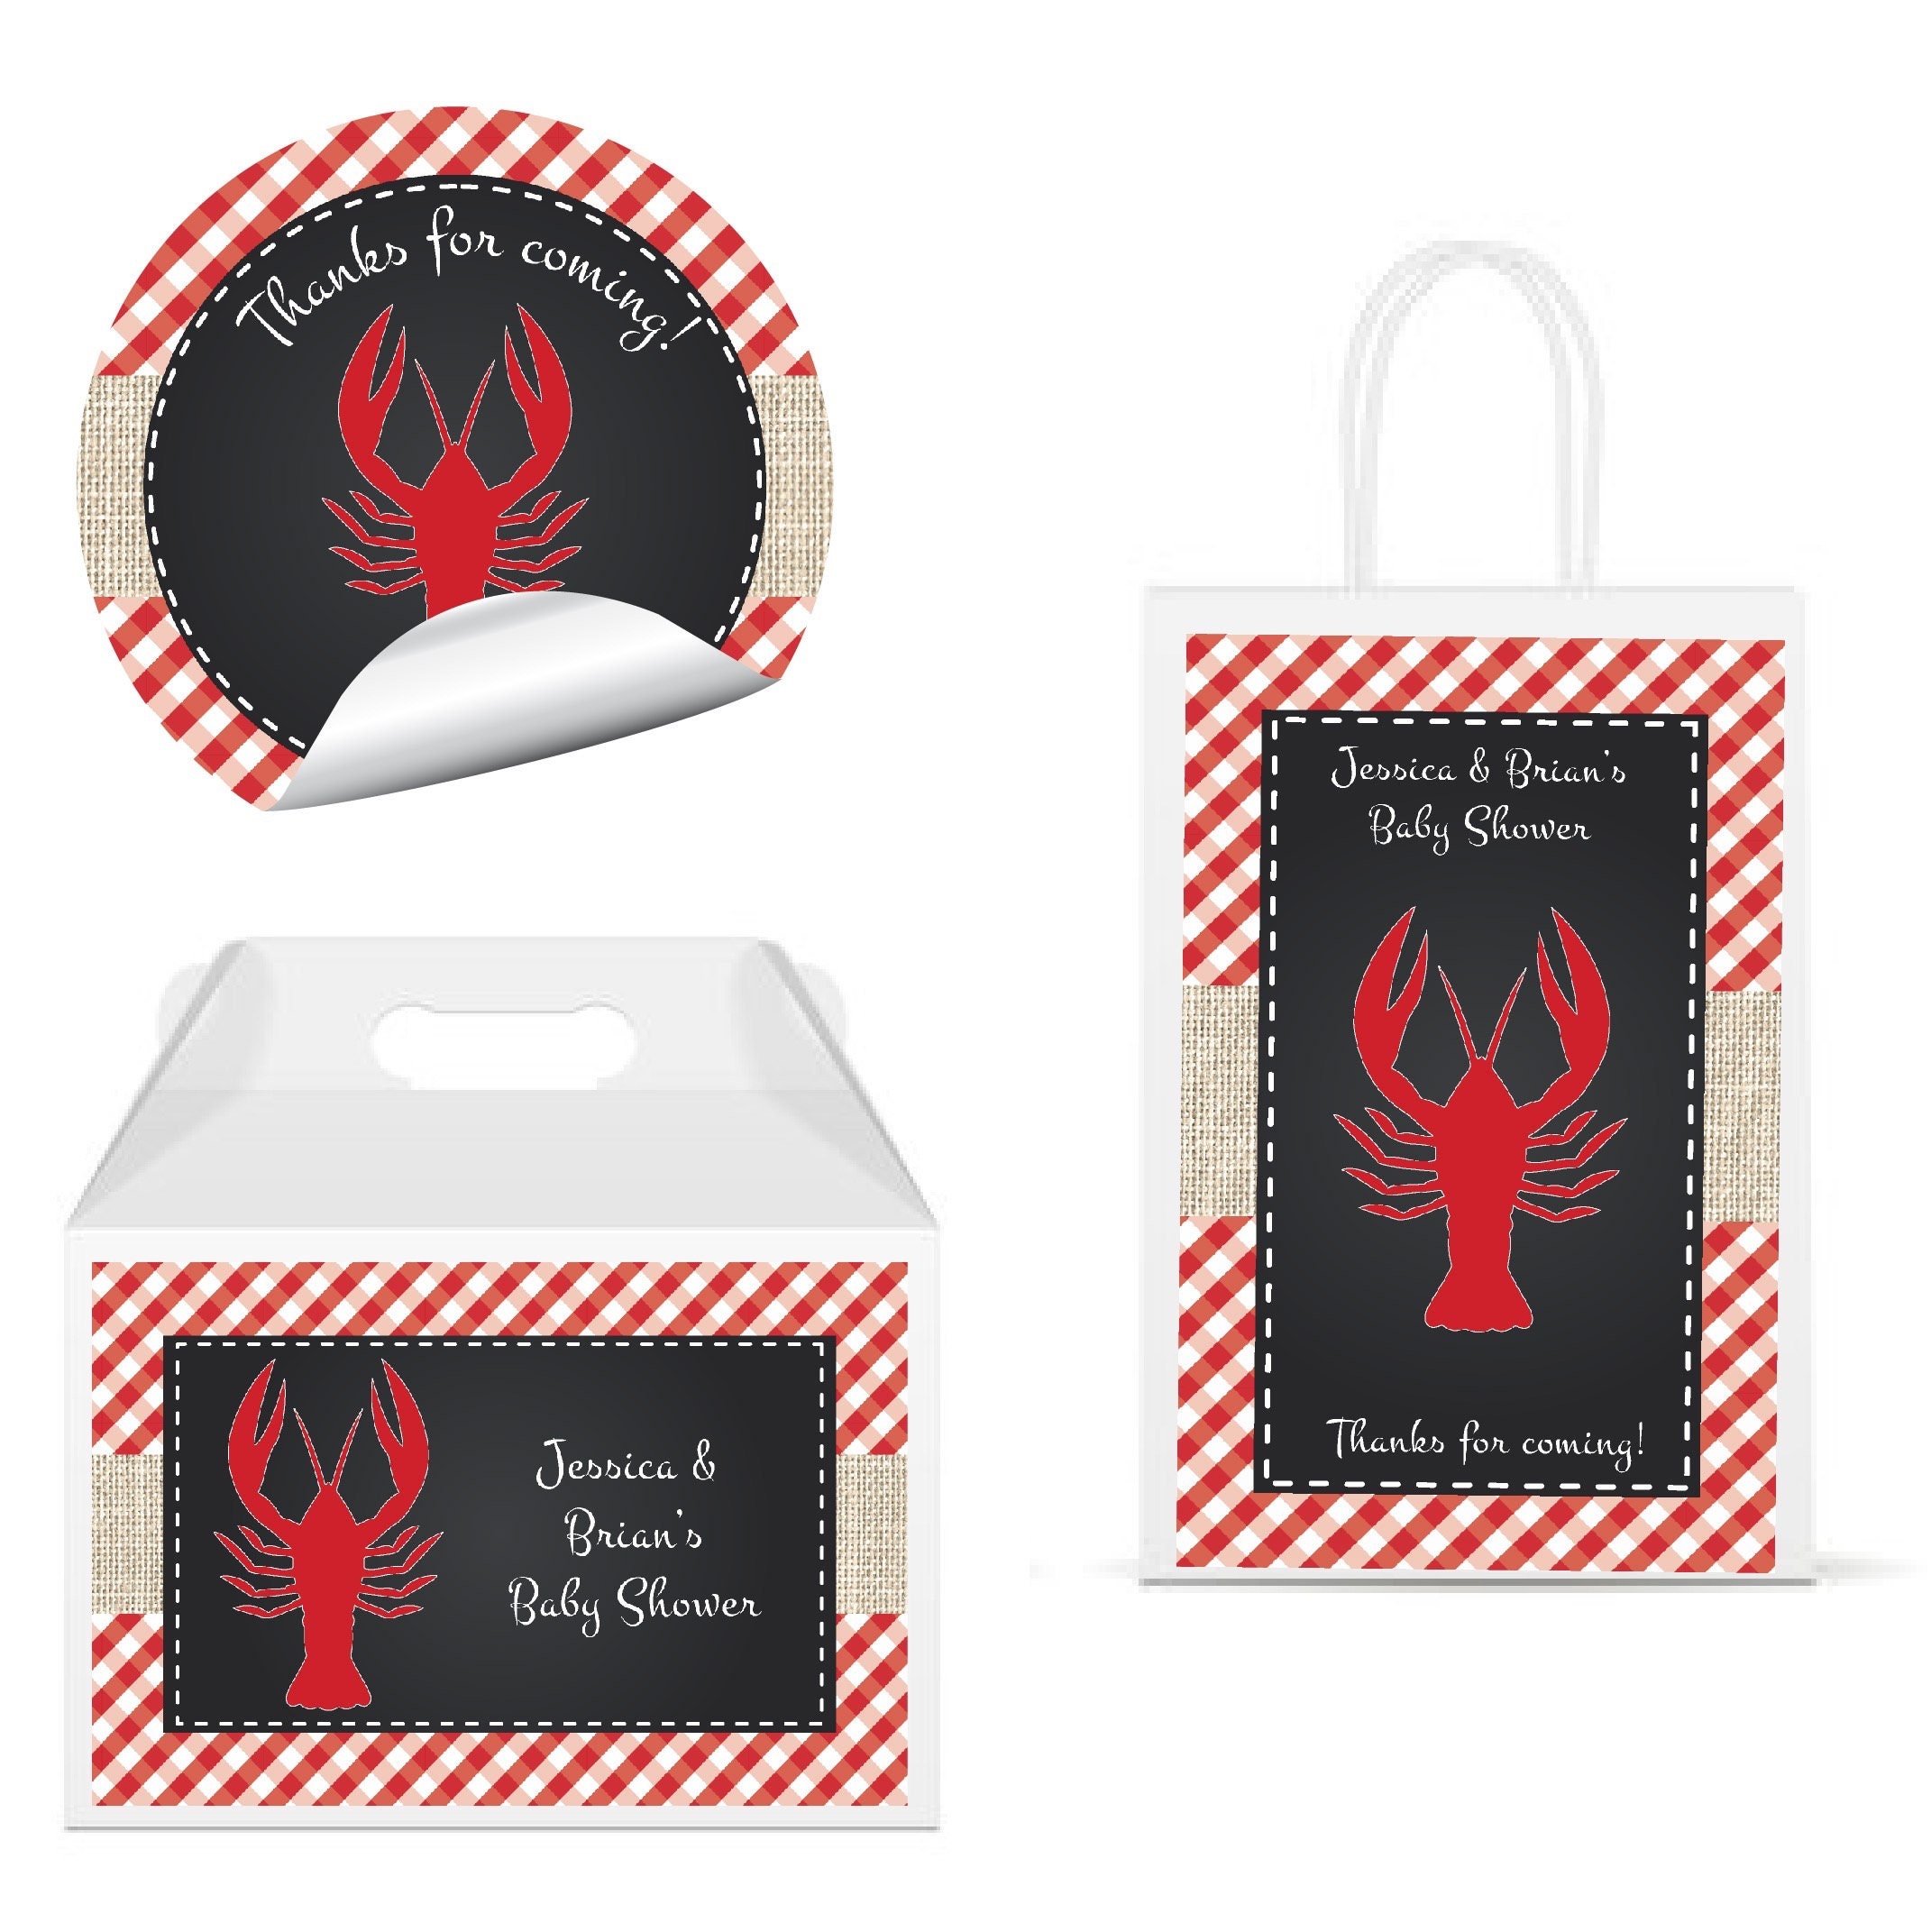 Crawfish Boil | Summer Cajun Seafood - Printed Glossy Labels For Party Favor Bags, Gable Boxes, Gift Round Square Stickers